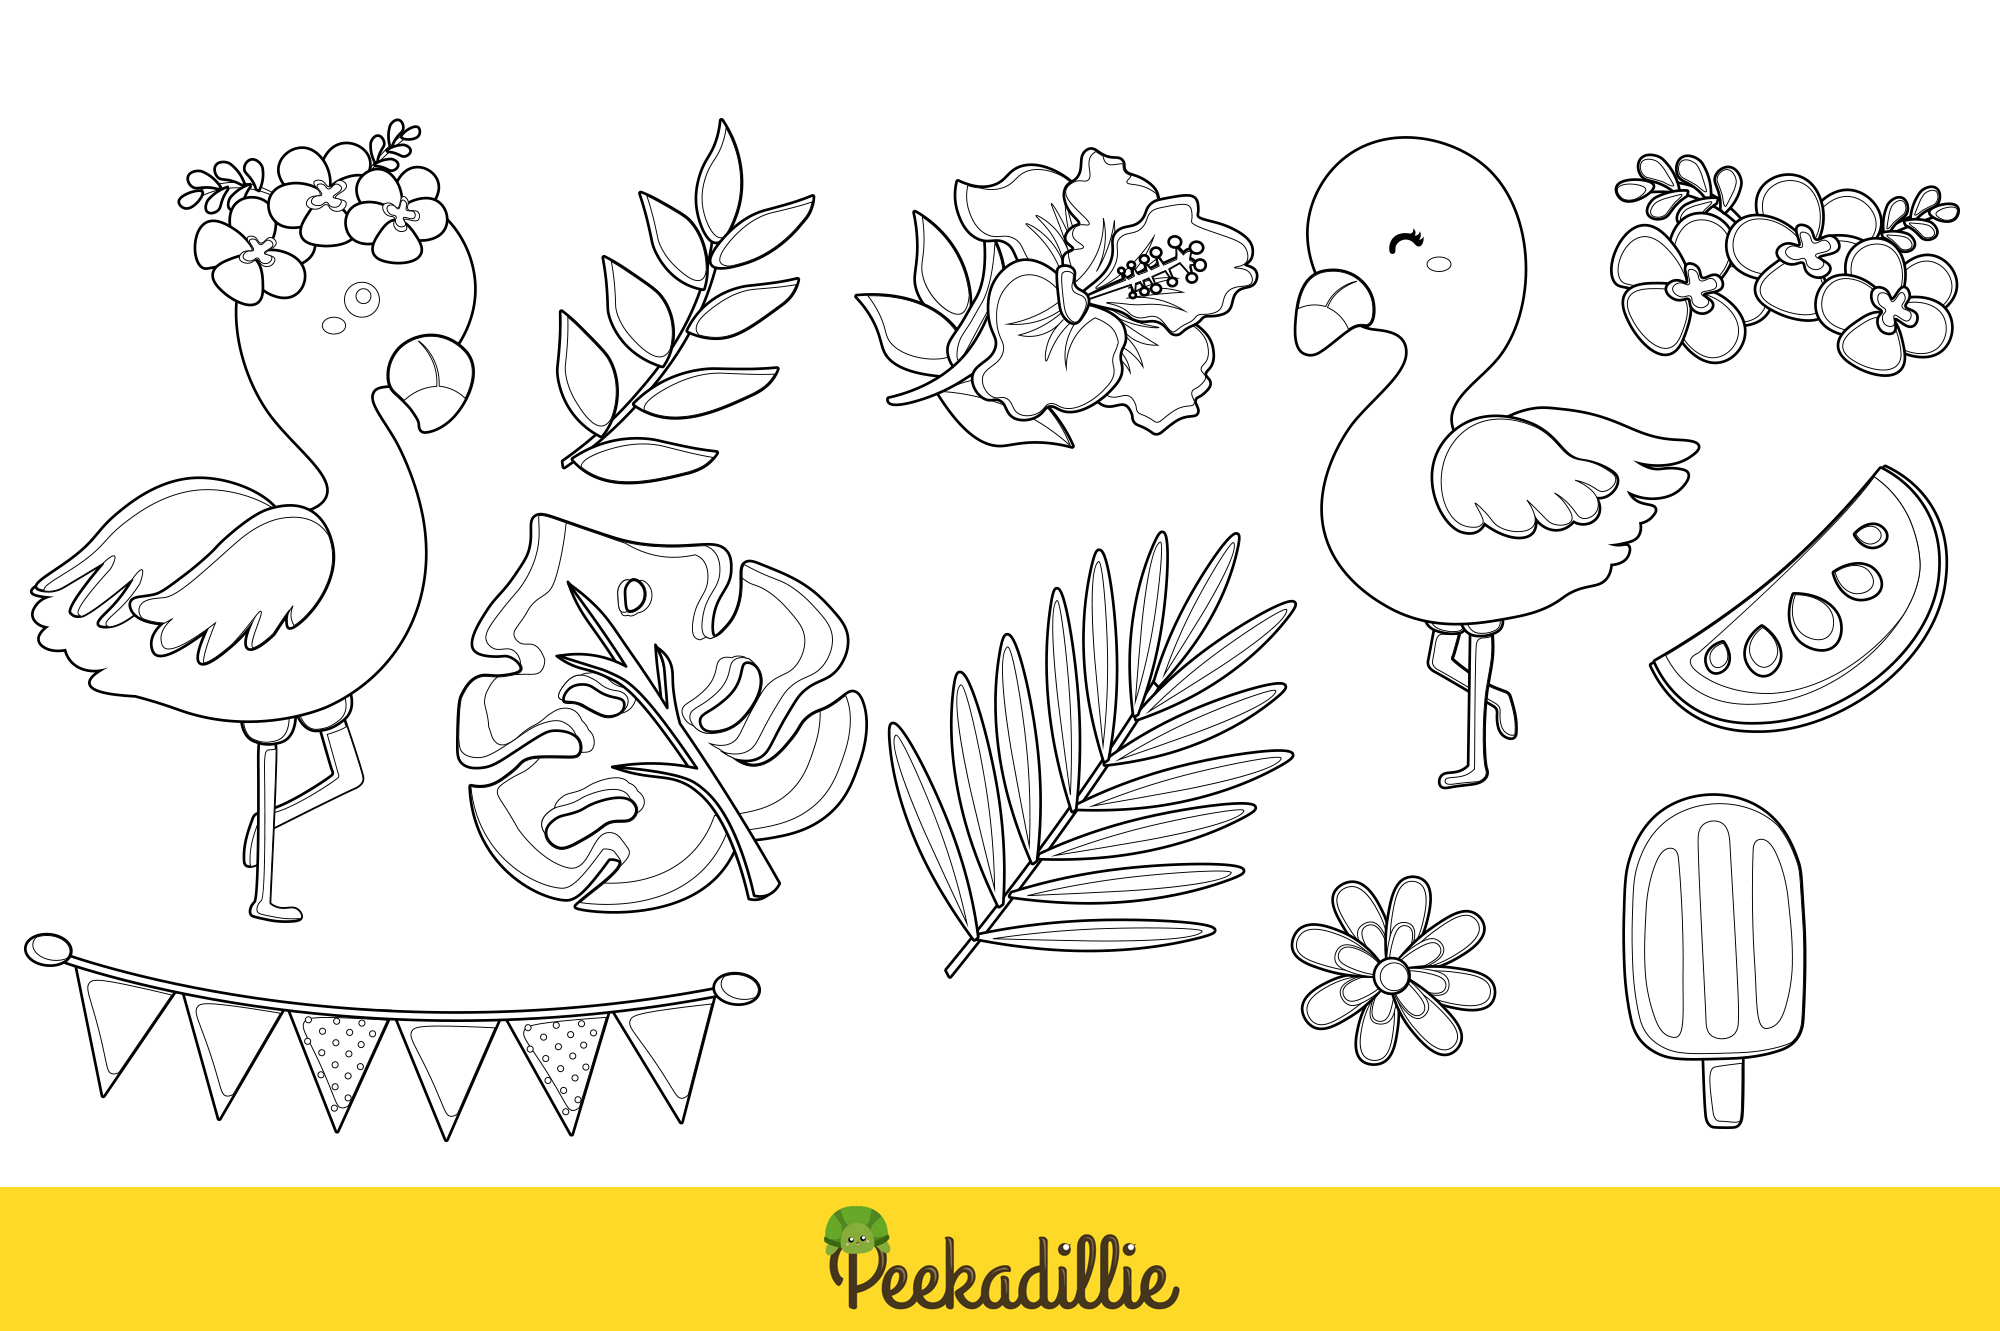 Coloring page with a bunch of birds and flowers.